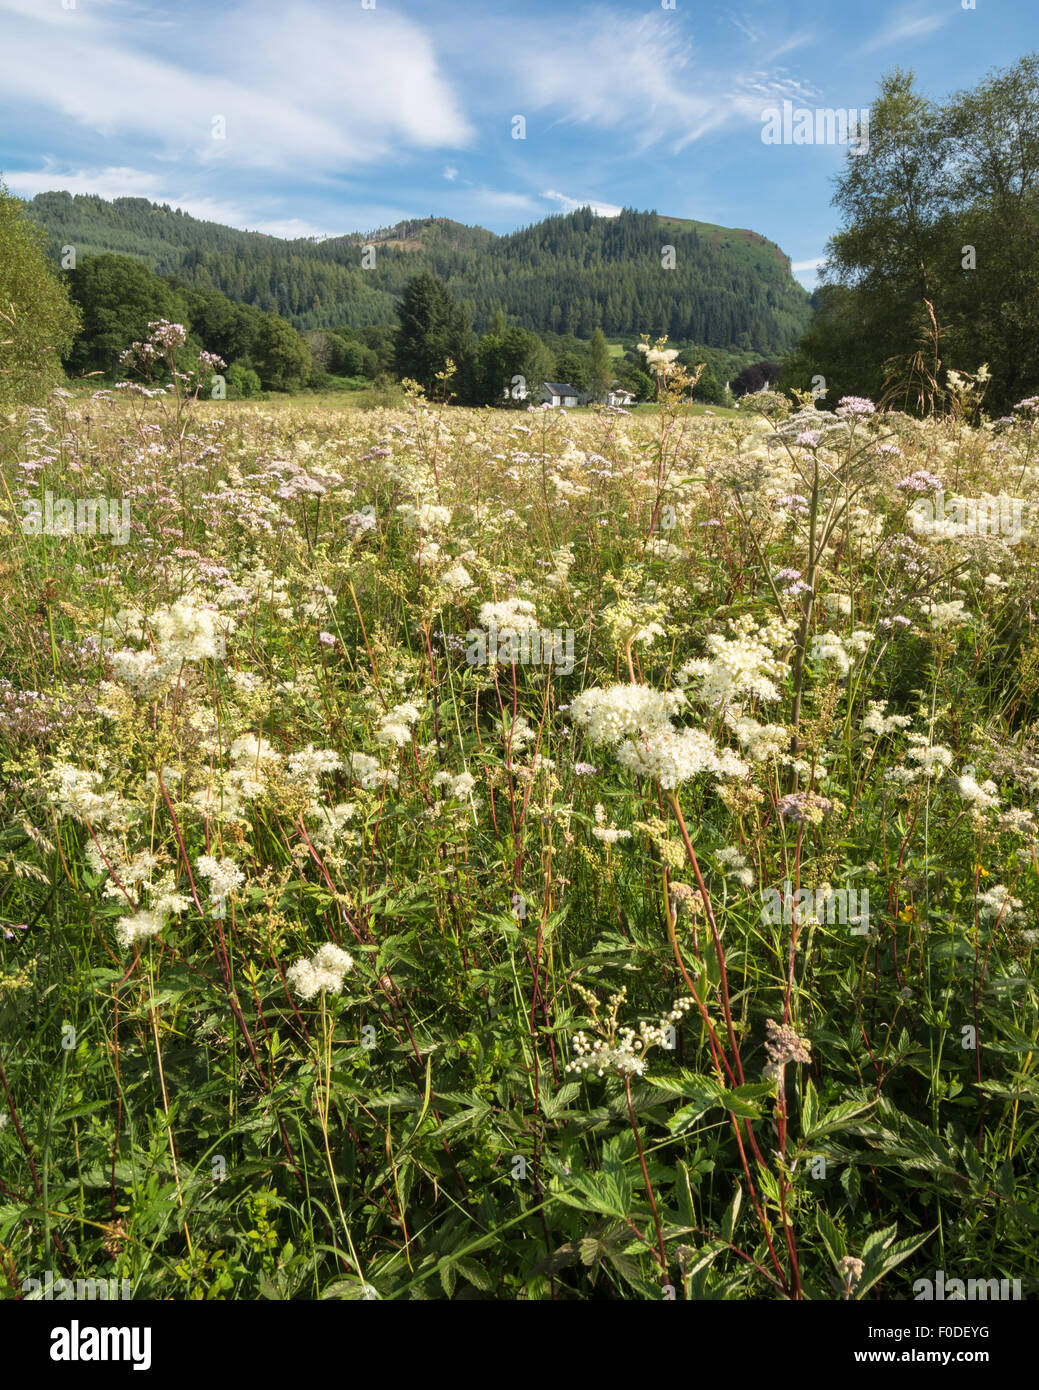 Aberfoyle, Loch Lomond and the Trossachs National Park, Scotland, UK - 13 August 2015: UK weather - this year's unusually wet weather in Scotland has suited damp loving wildflowers. Here the beautiful creamy flowers of Meadowsweet (filipendula ulmaria) are seen alongside pale pink Upright Hedge Parsley (torilis japonica) in a field on the outskirts of Aberfoyle in the Loch Lomond and the Trossachs National Park, Scotland Credit:  kayrtravel/Alamy Live News Stock Photo